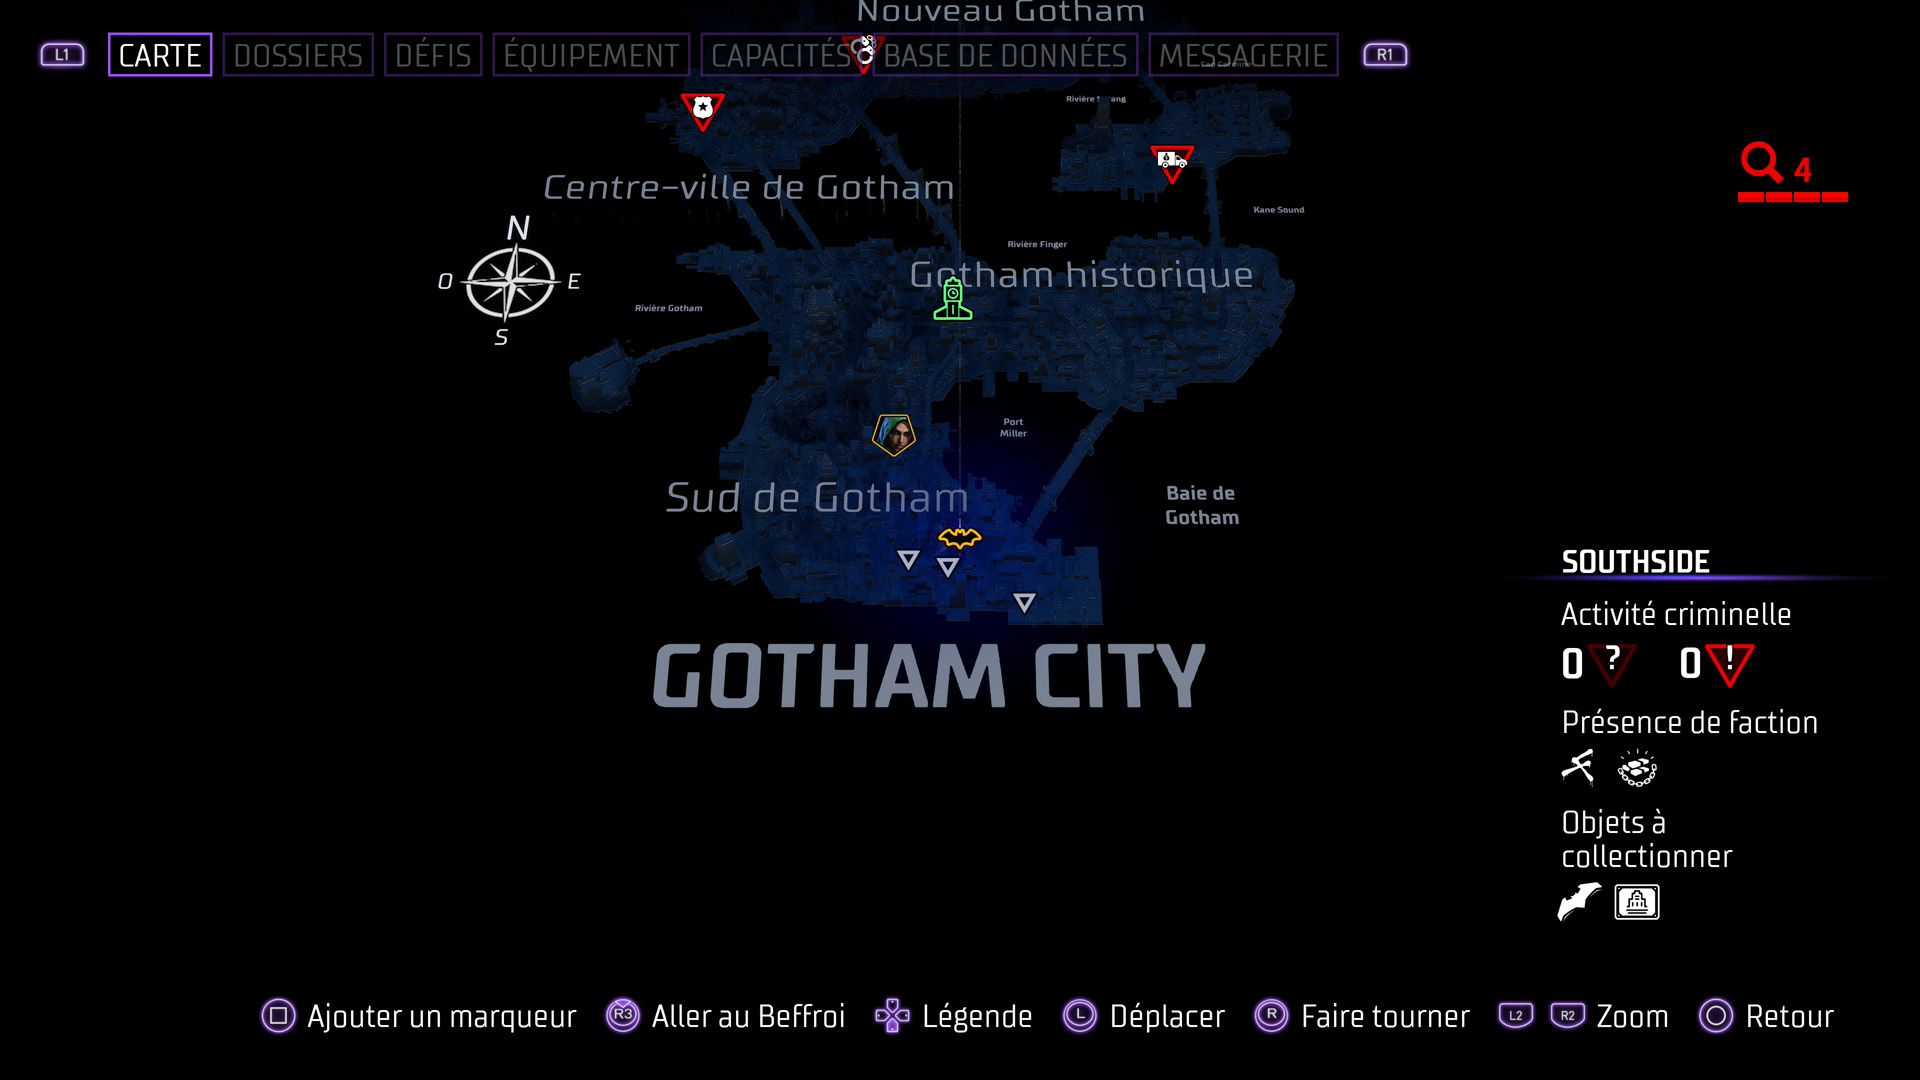 Les monuments - southside - verrerie - gotham knights